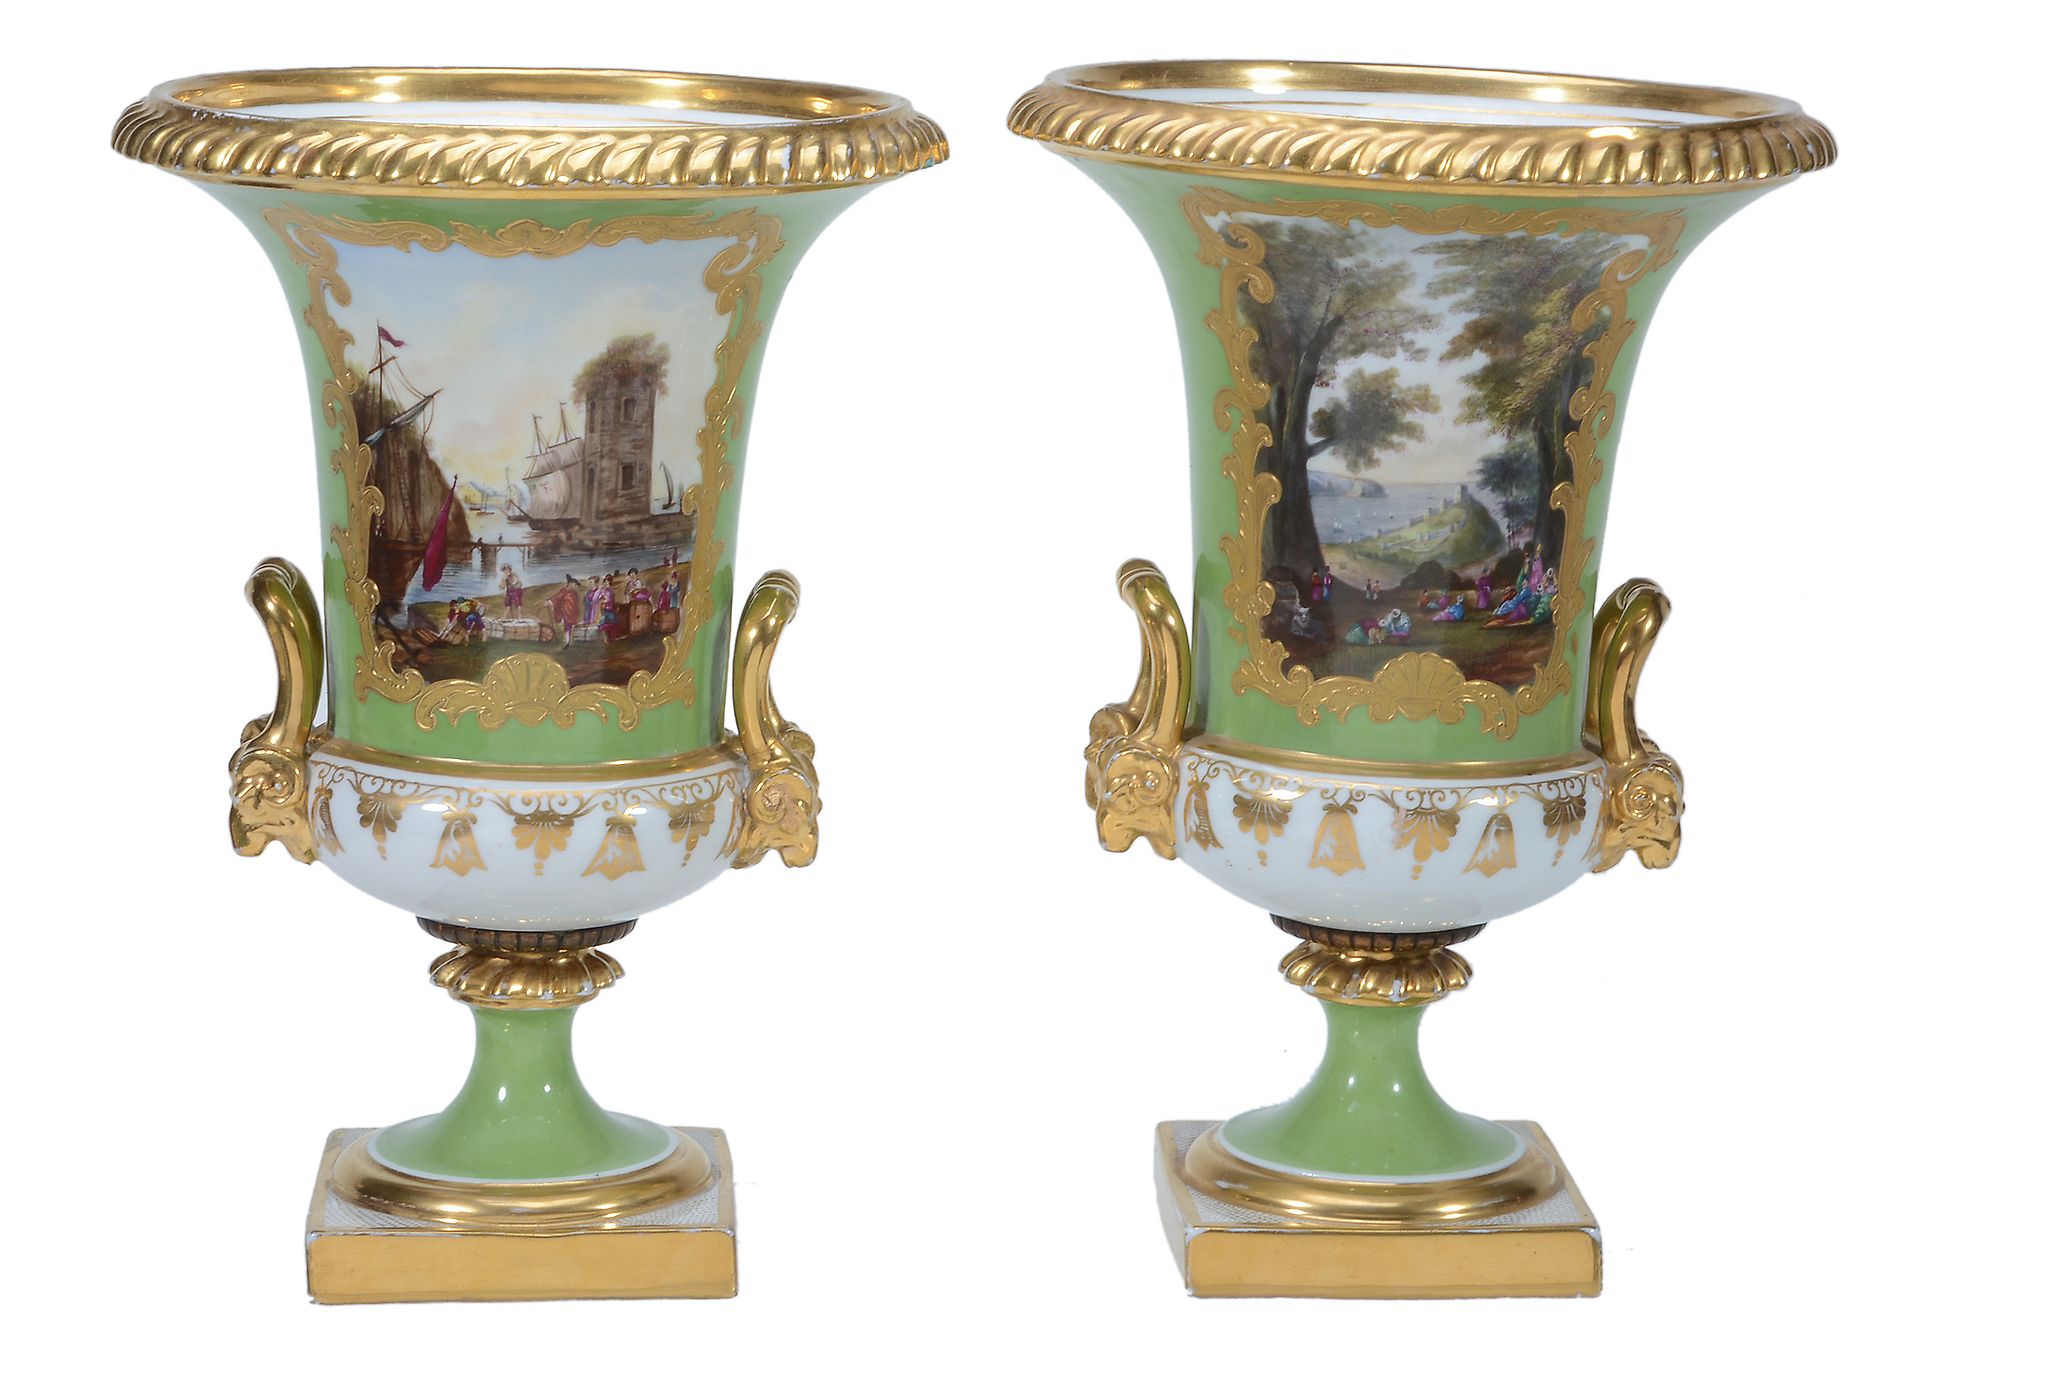 A pair of Samson porcelain green-ground campana urns in the Derby style  A pair of Samson